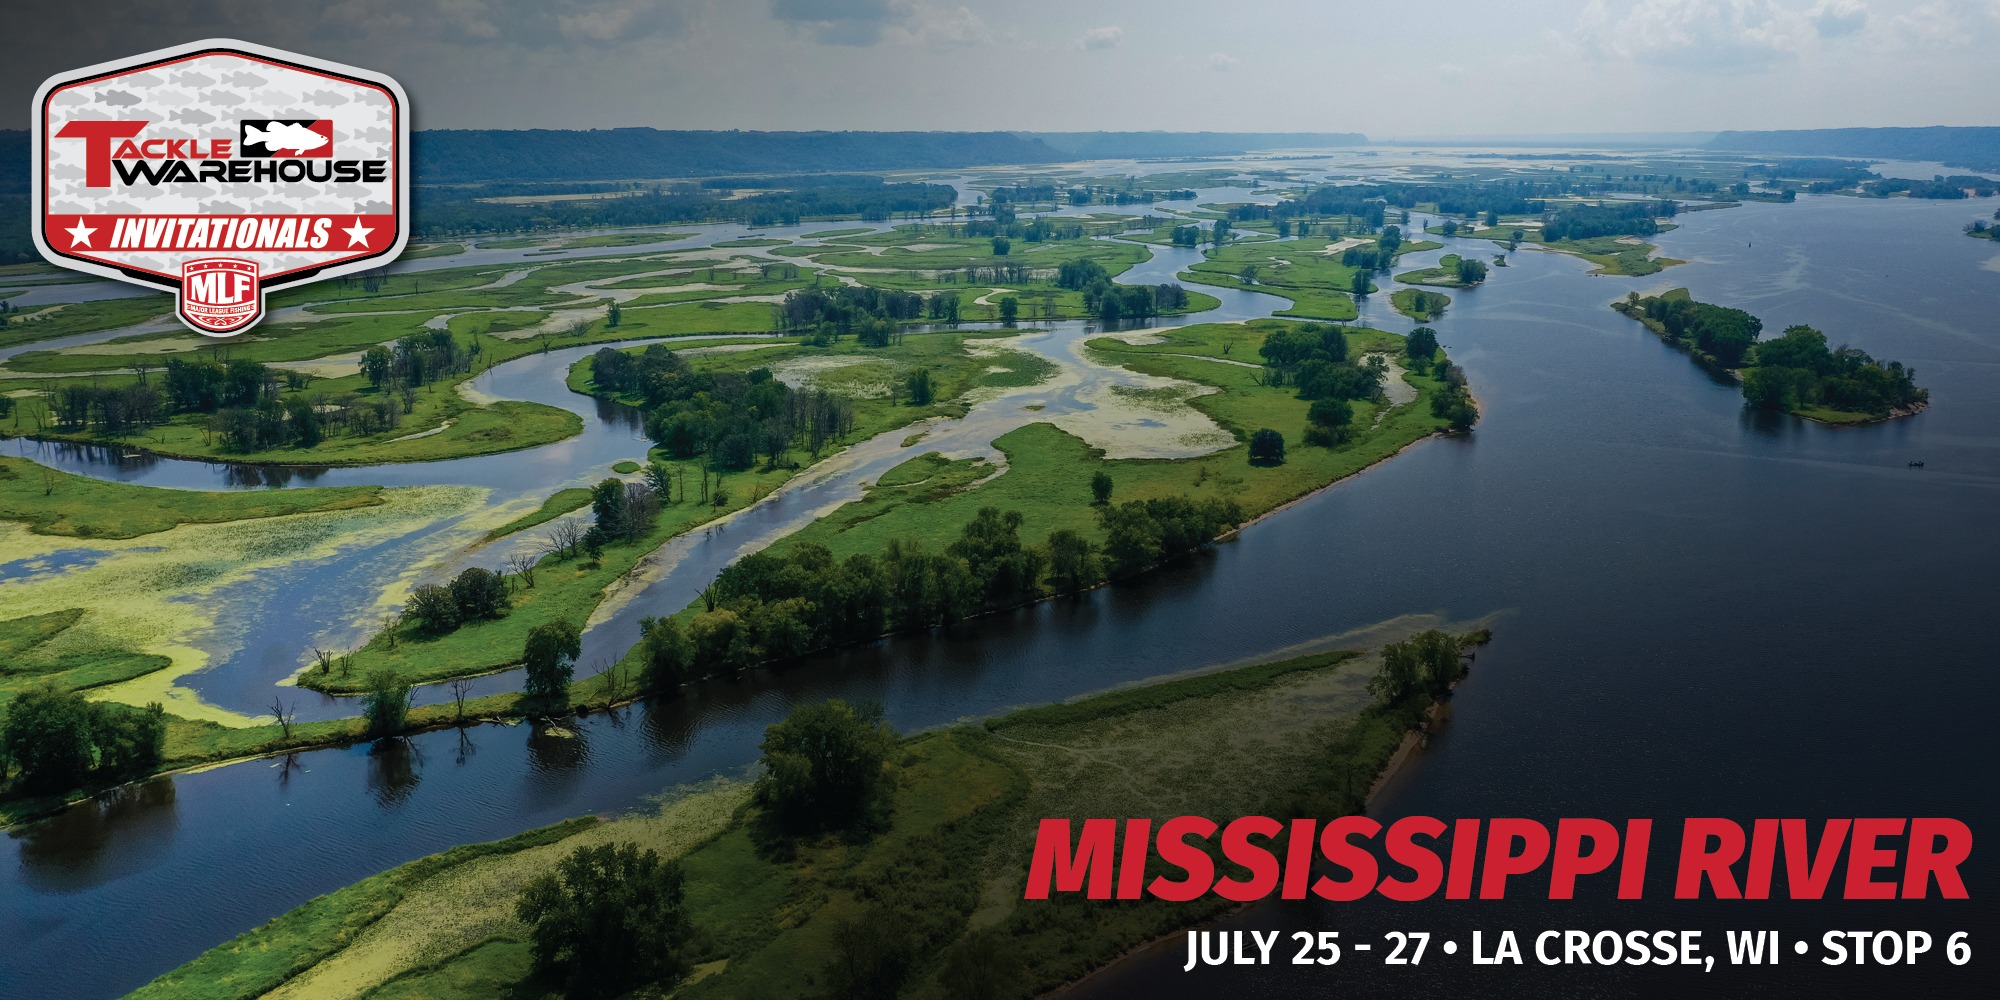 La Crosse set to host final Tackle Warehouse Invitationals of season next  week – Mercury Stop 6 on the Mississippi River - Major League Fishing